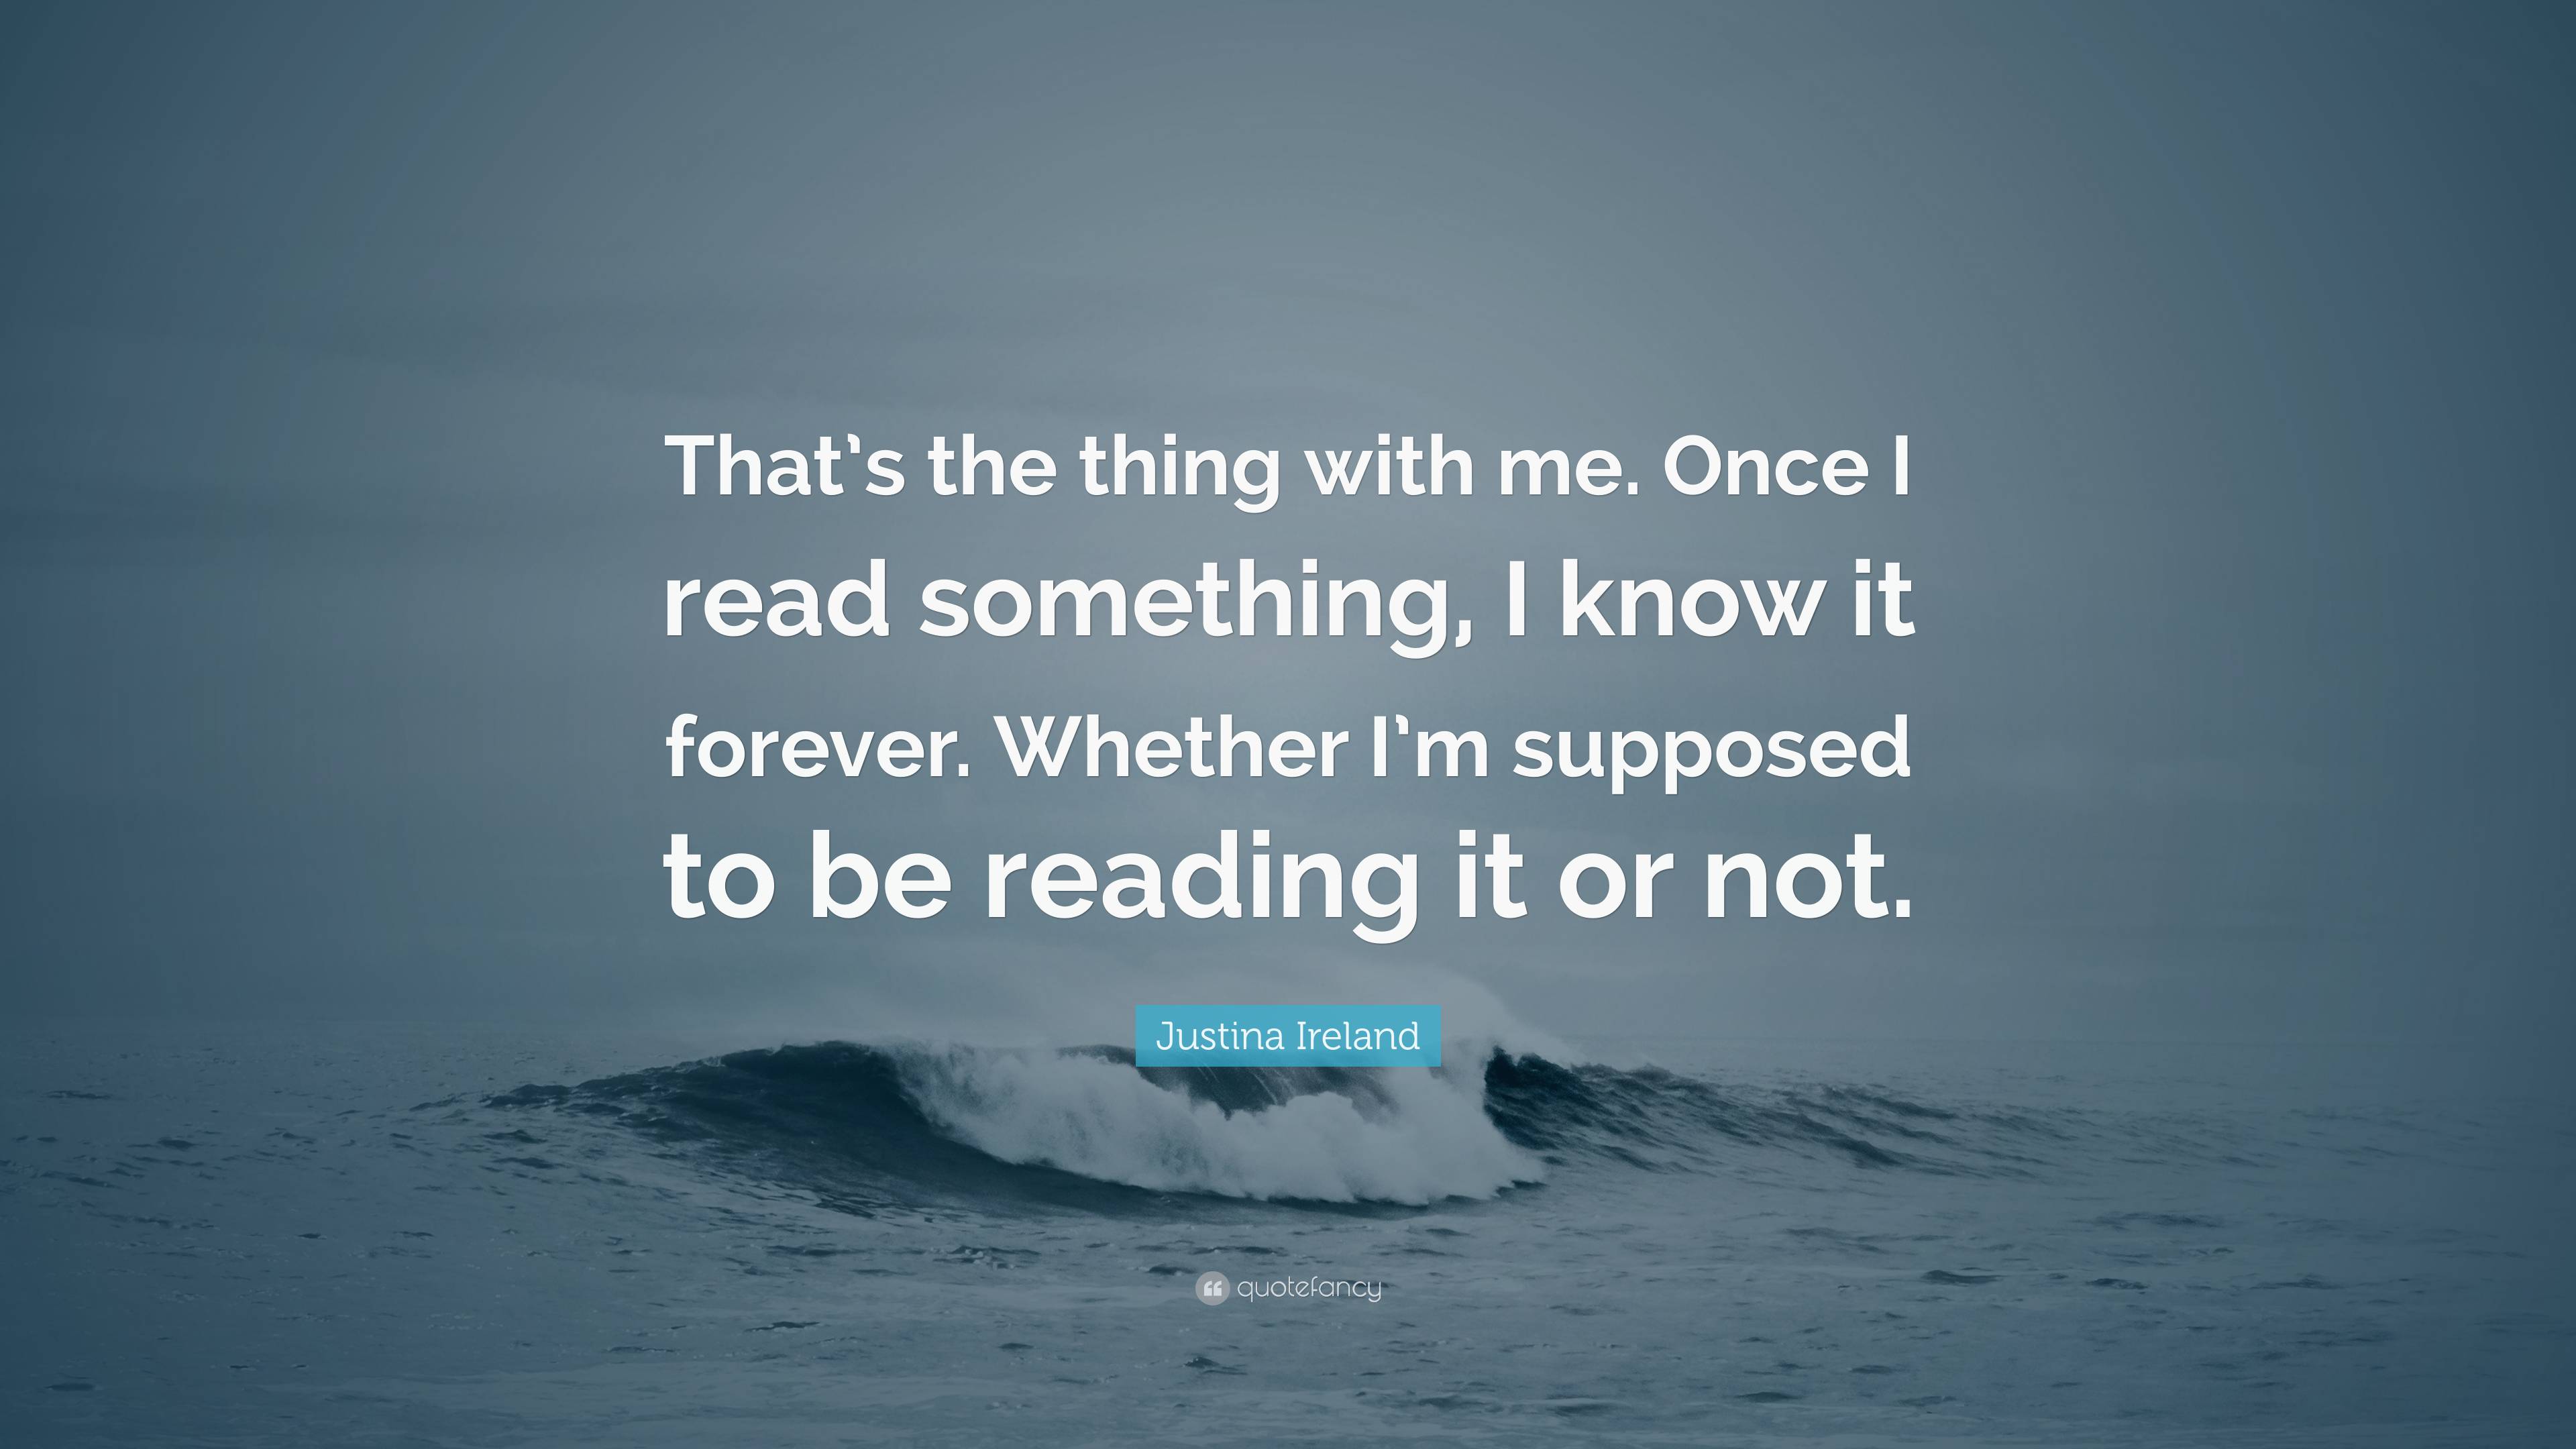 Justina Ireland Quote: “That’s the thing with me. Once I read something ...